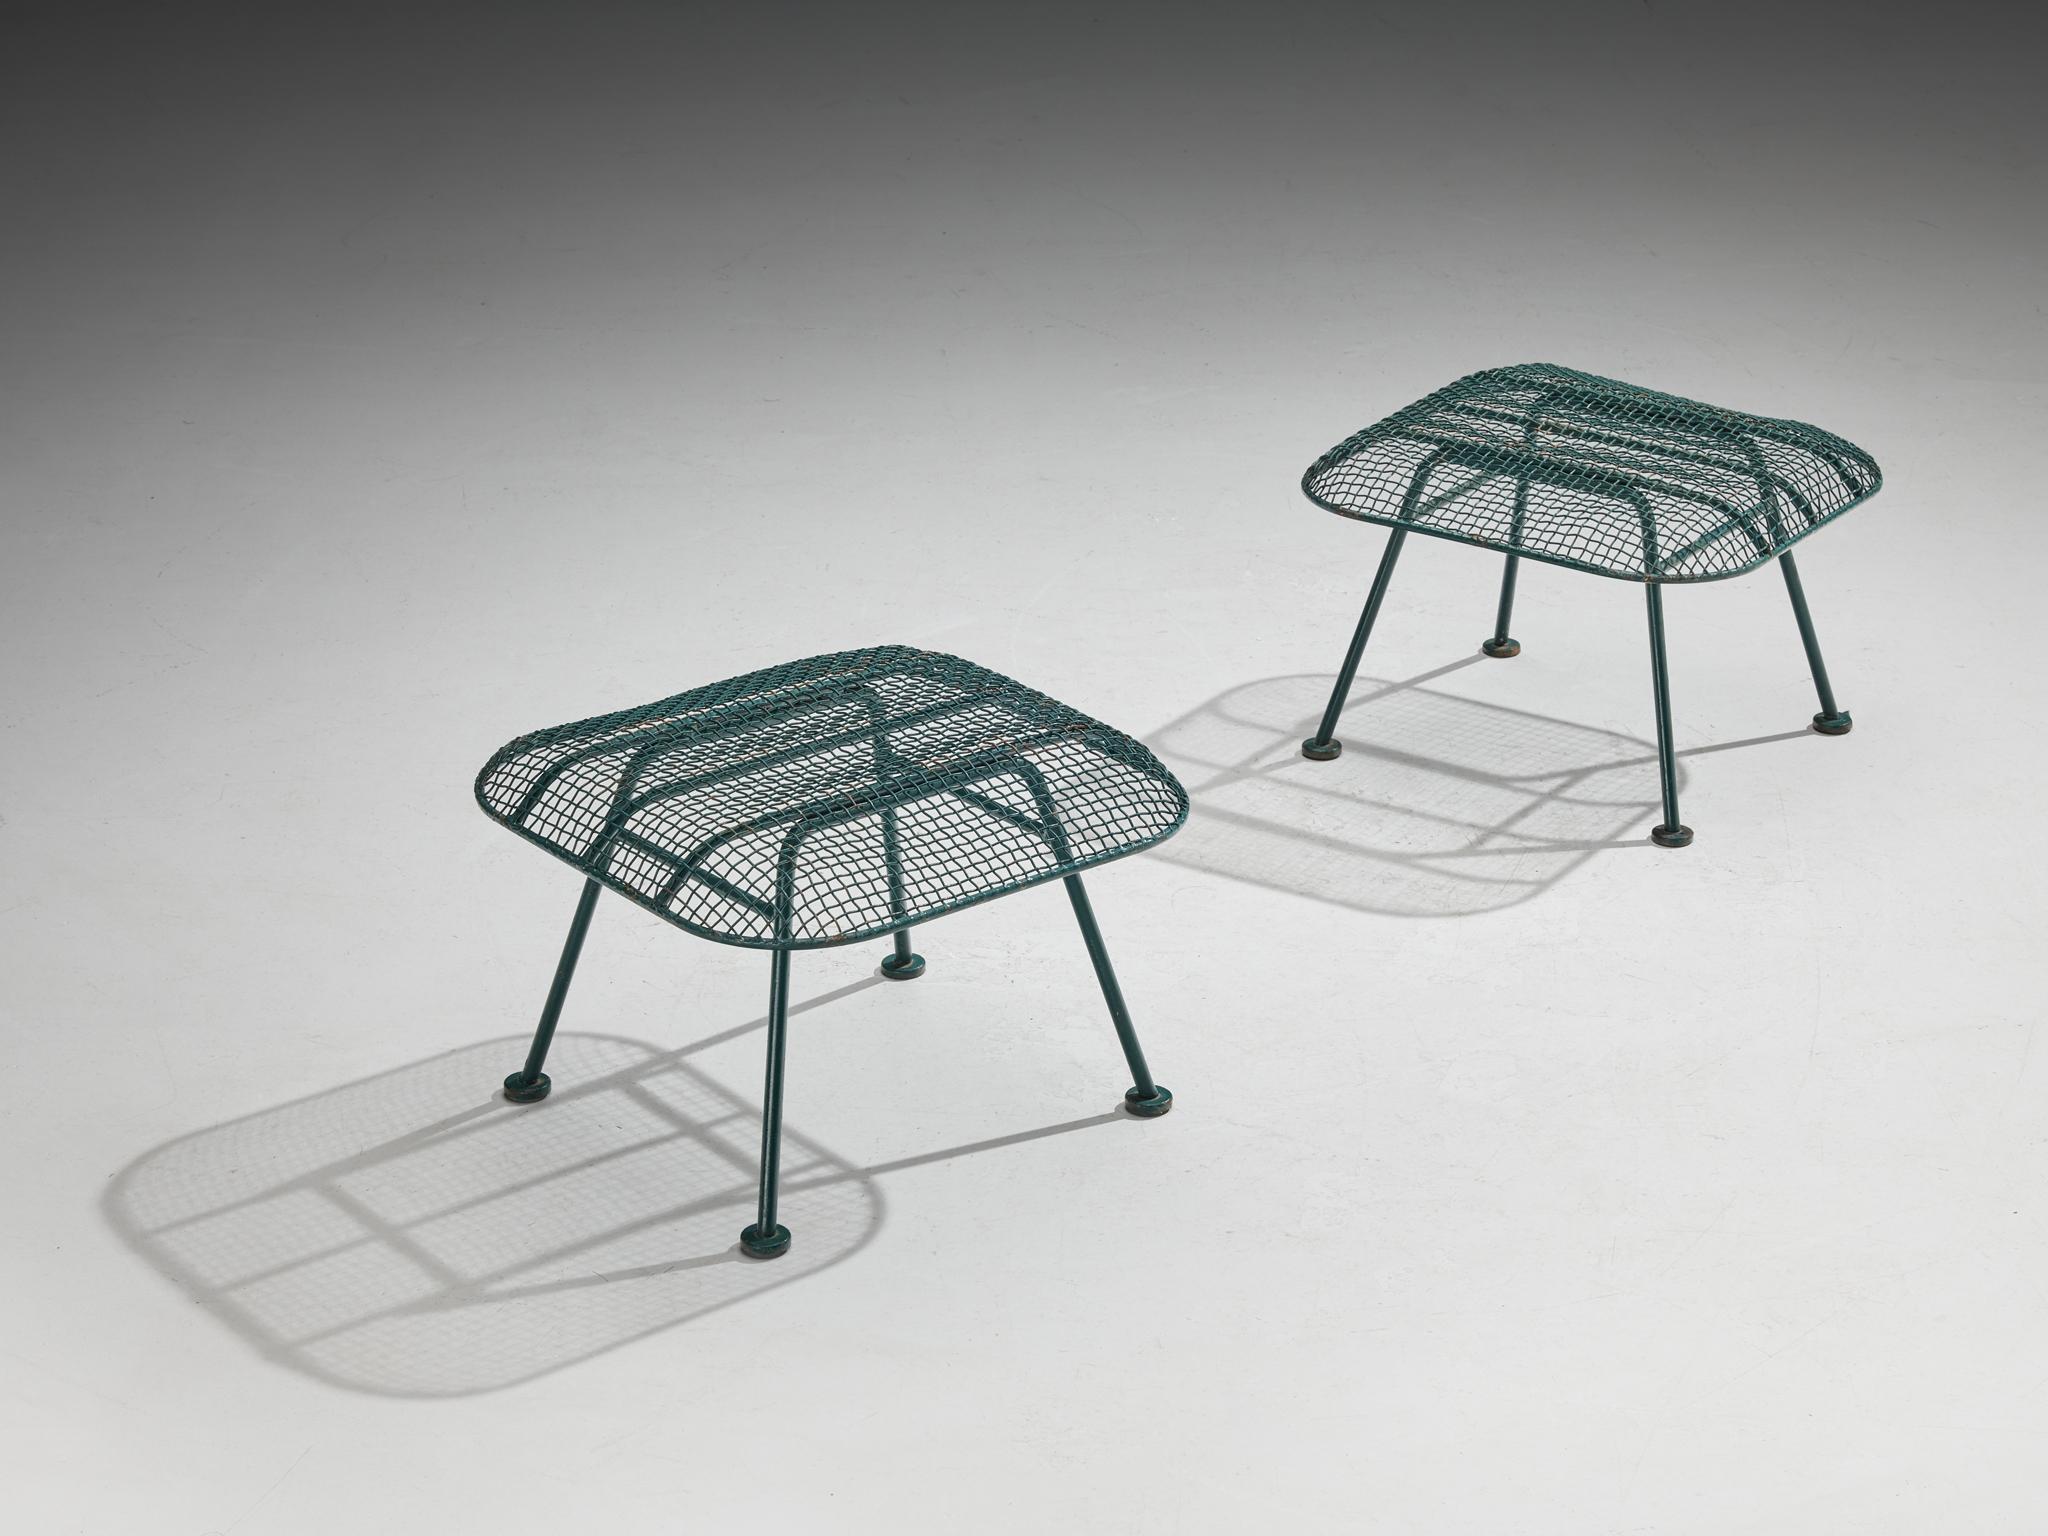 Russell Woodard, pair of 'Sculptura' patio ottomans, lacquered iron and steel, United States, 1950s

This 'Sculptura' ottoman is designed by Russell Woodard. The stool features an intricate interlacing of steel wires, resulting in a linear grill